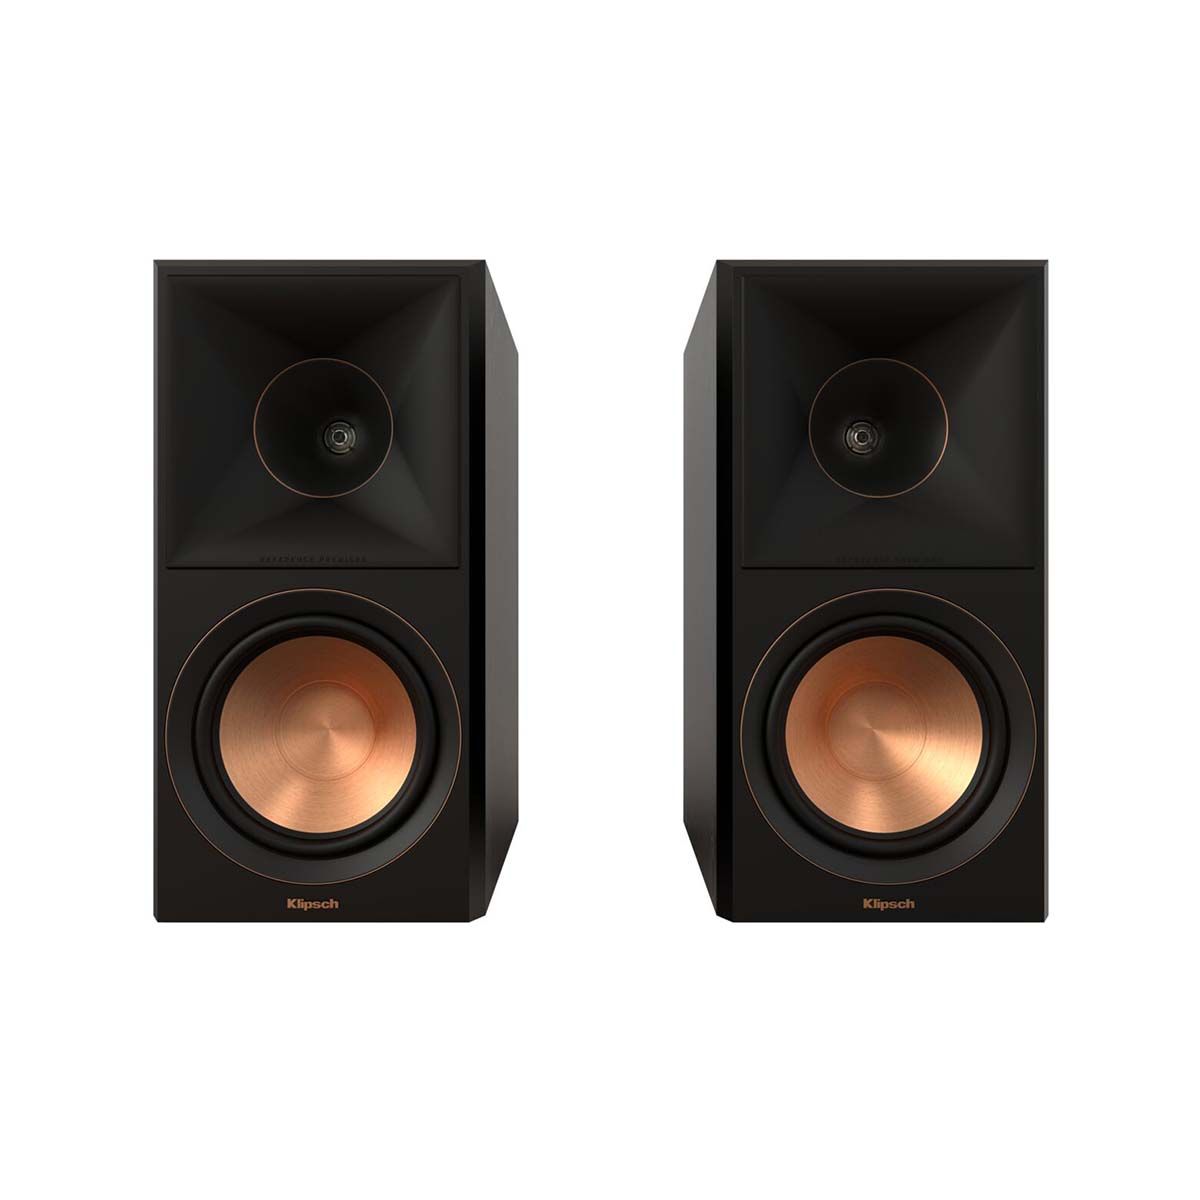 Klipsch RP-600M II Bookshelf Speakers - Ebony - Pair - front view of pair without grills